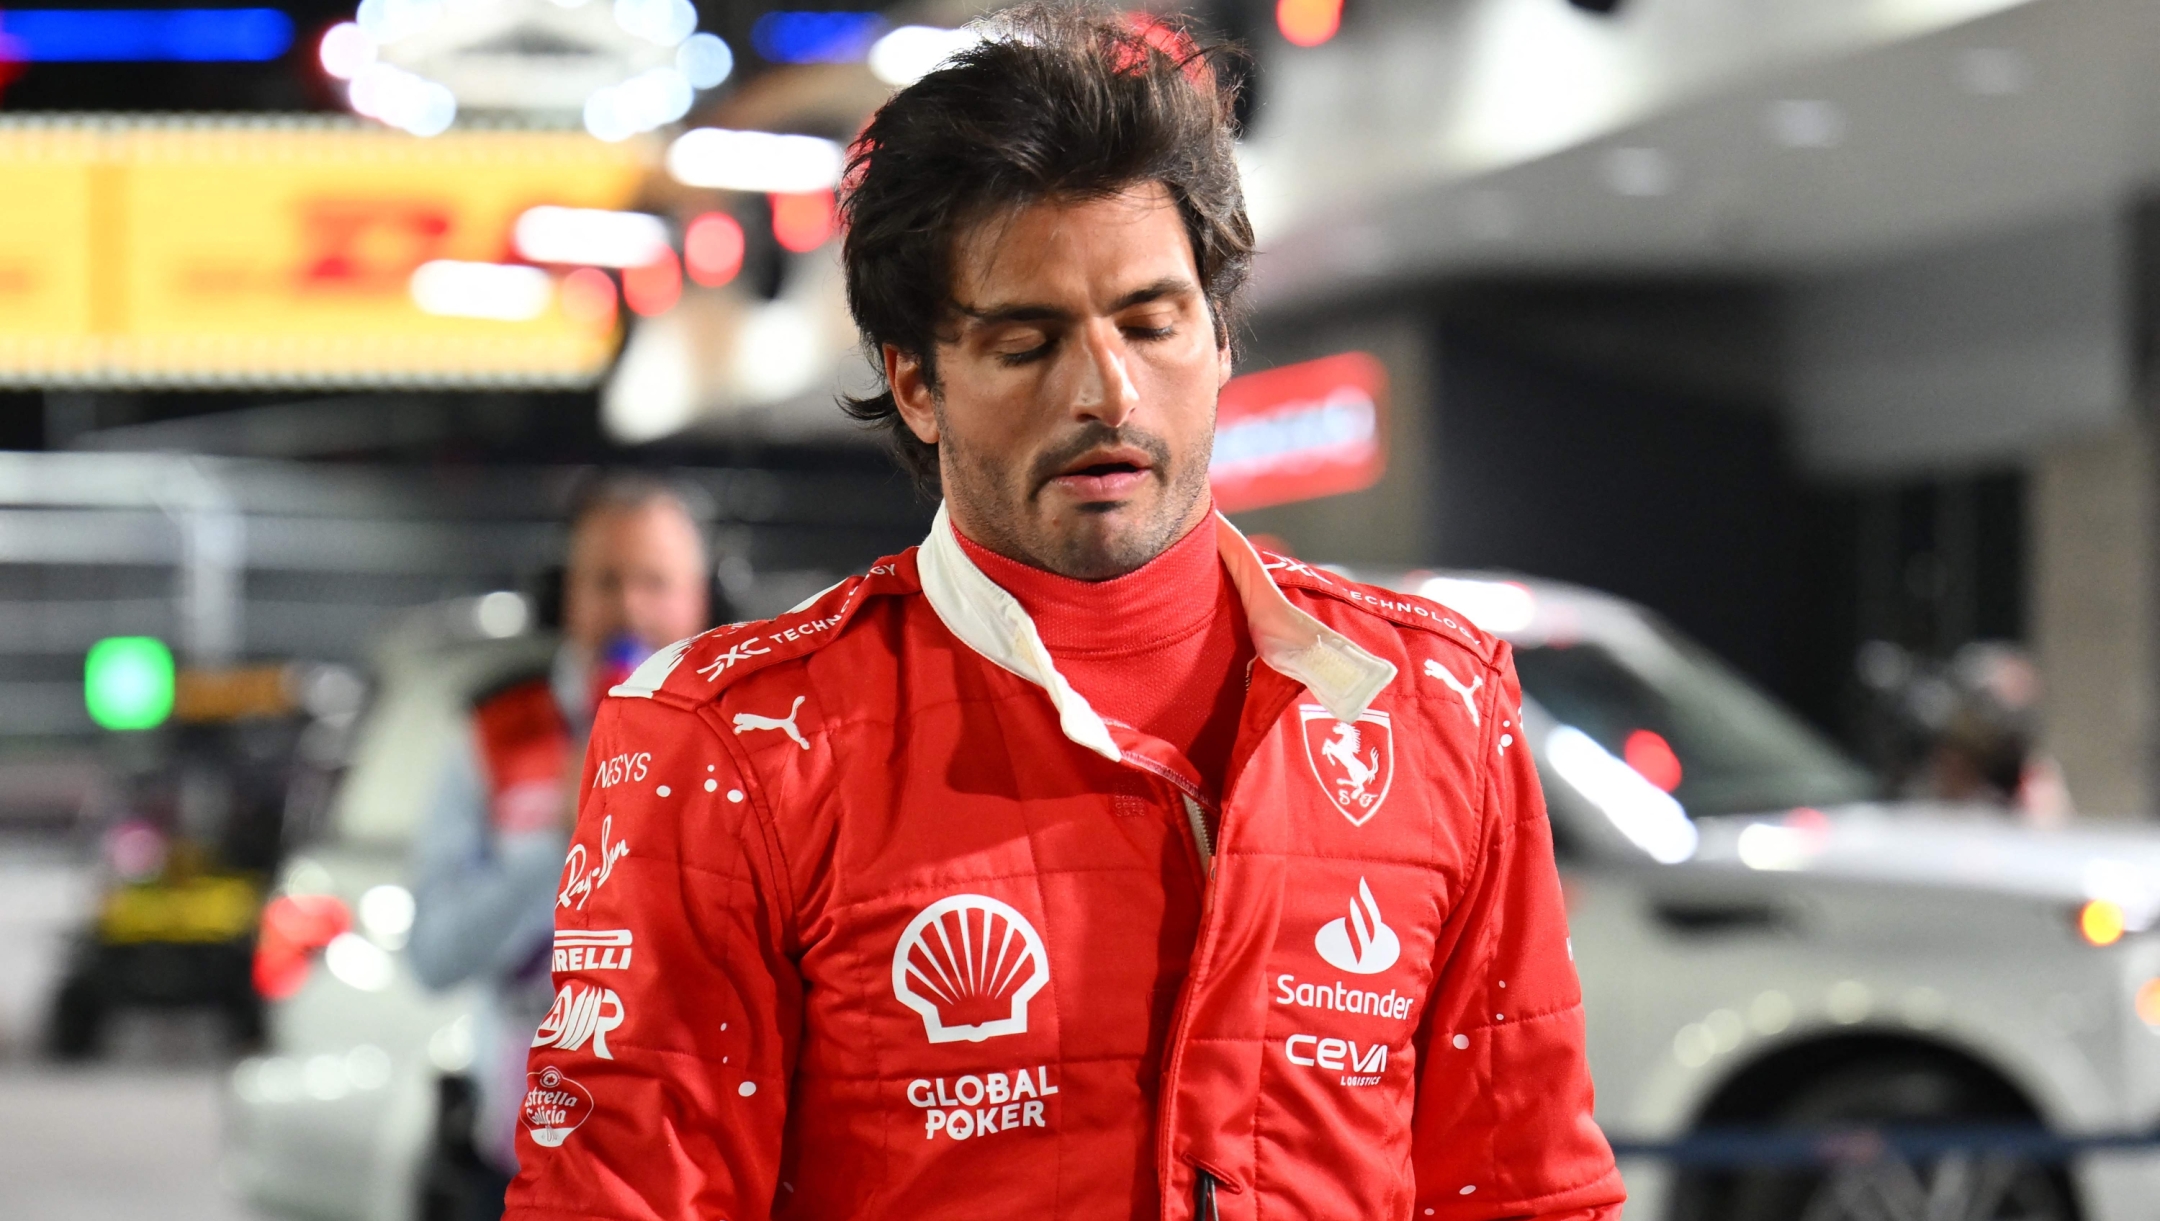 Ferrari's Spanish driver Carlos Sainz Jr., returns to the pit after an accident during the first practice session for the Las Vegas Formula One Grand Prix on November 16, 2023, in Las Vegas, Nevada. Race stewards cancelled the practice after the accident to inspect the track. (Photo by ANGELA WEISS / AFP)